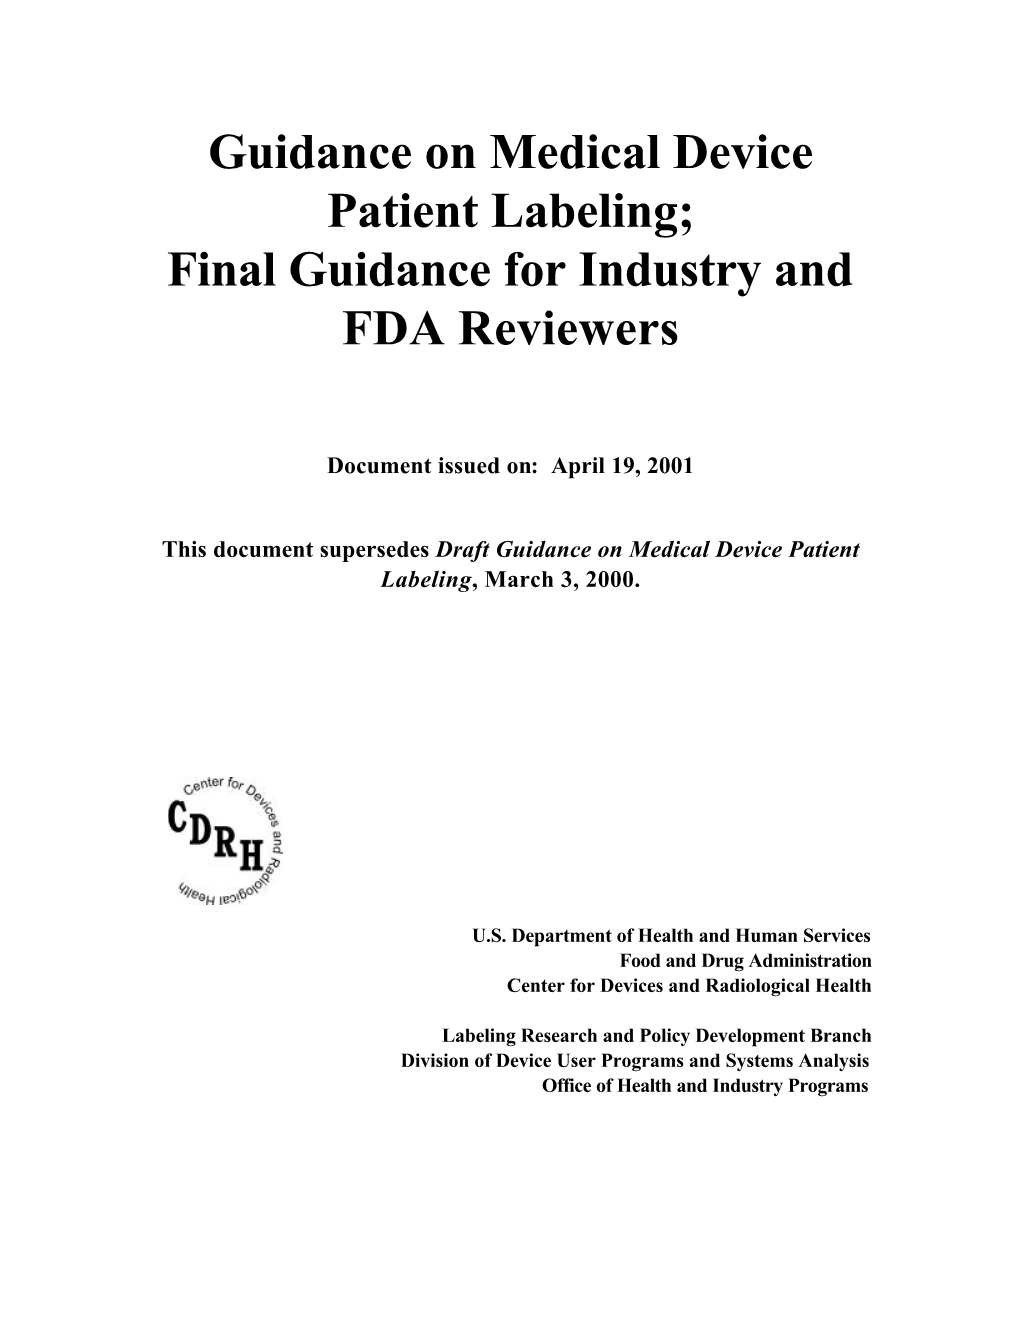 Guidance on Medical Device Patient Labeling; Final Guidance for Industry and FDA Reviewers